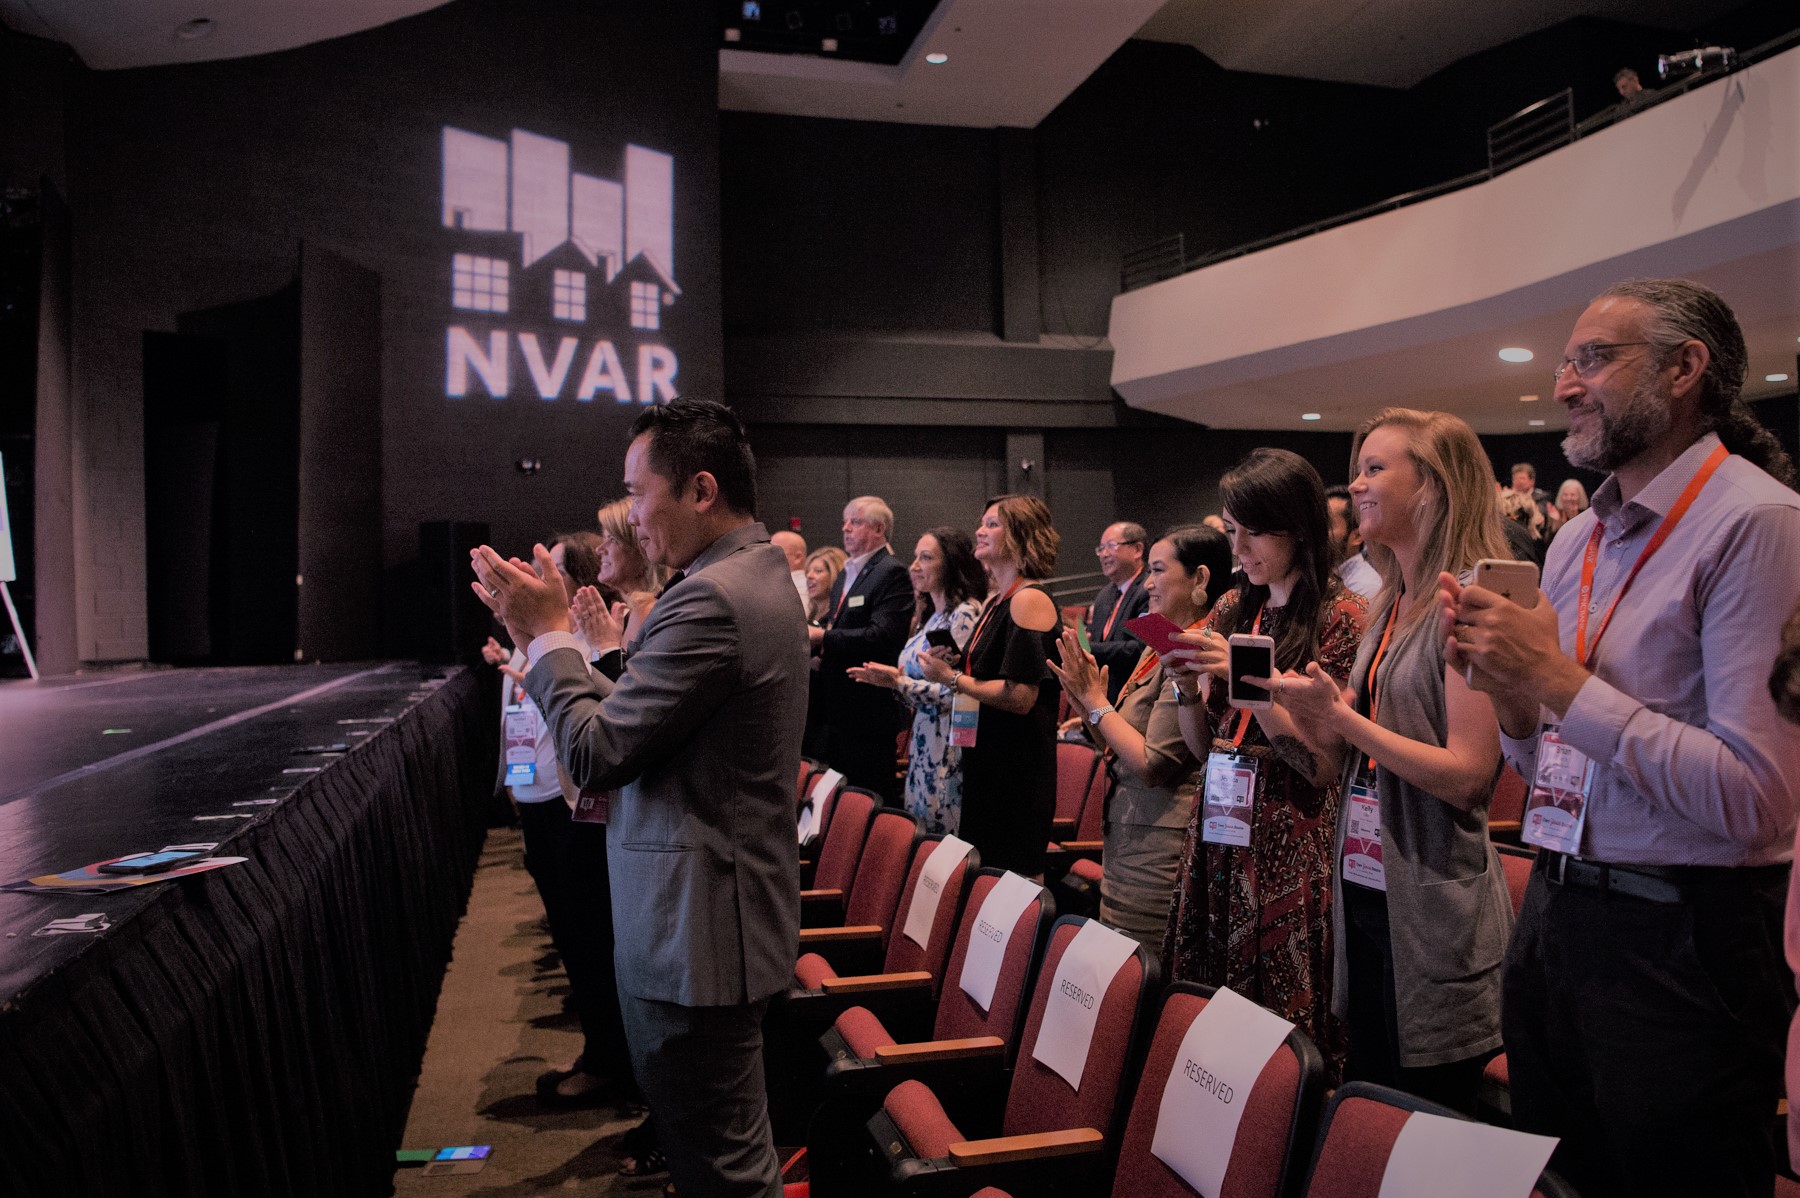 clapping at NVAR event